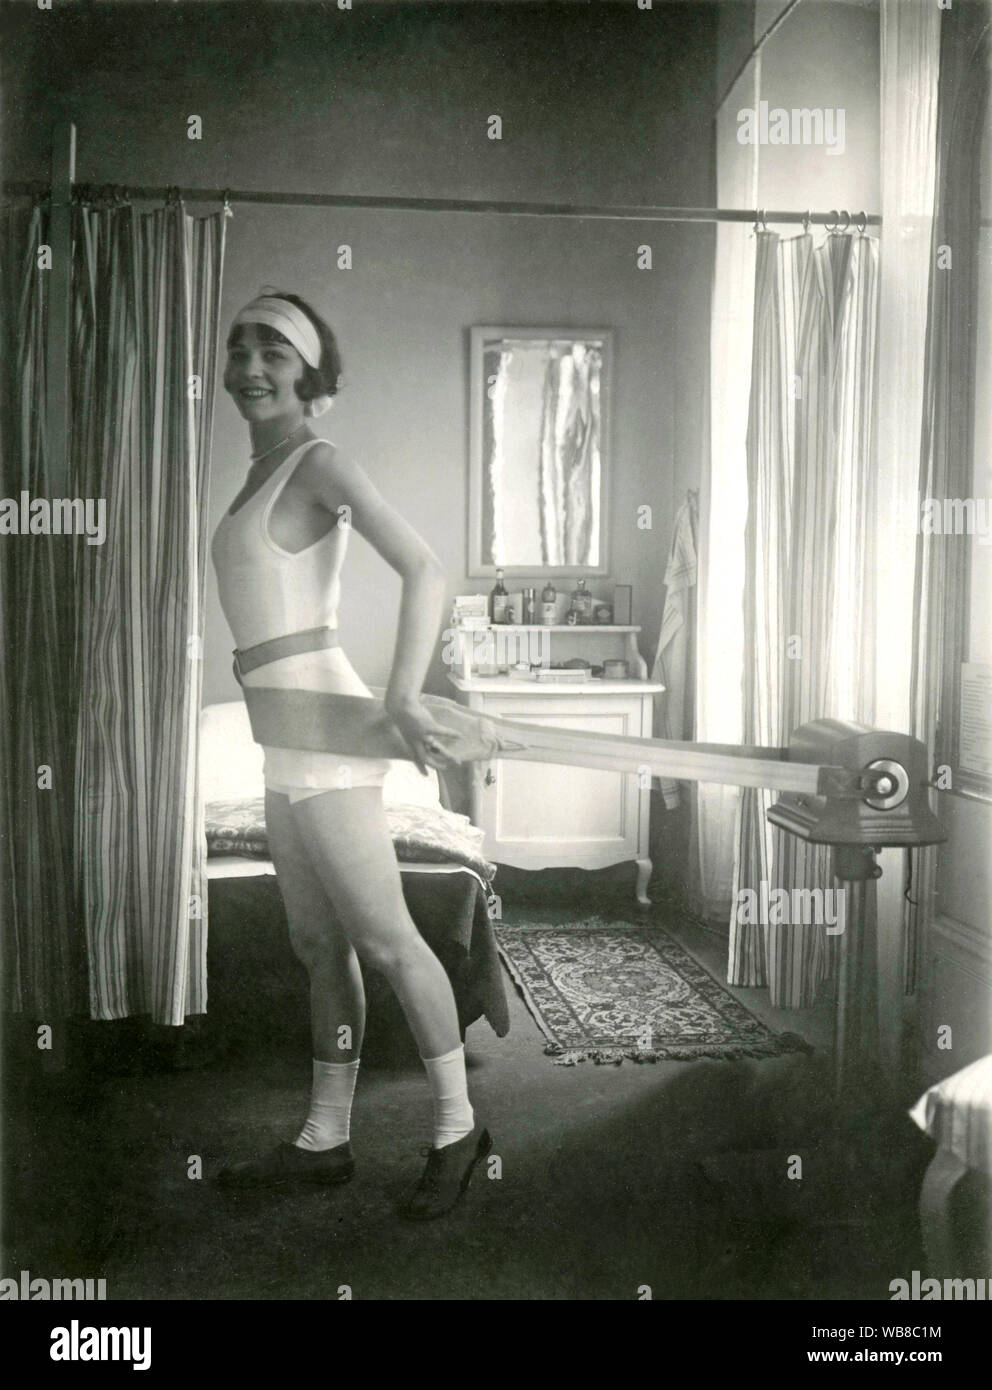 Massage in the 1930s. The swedish actress Disa Gillis demonstrates the belt massager and exercise machine that is designed to vibrate and massage the body. Sweden 1930s Stock Photo